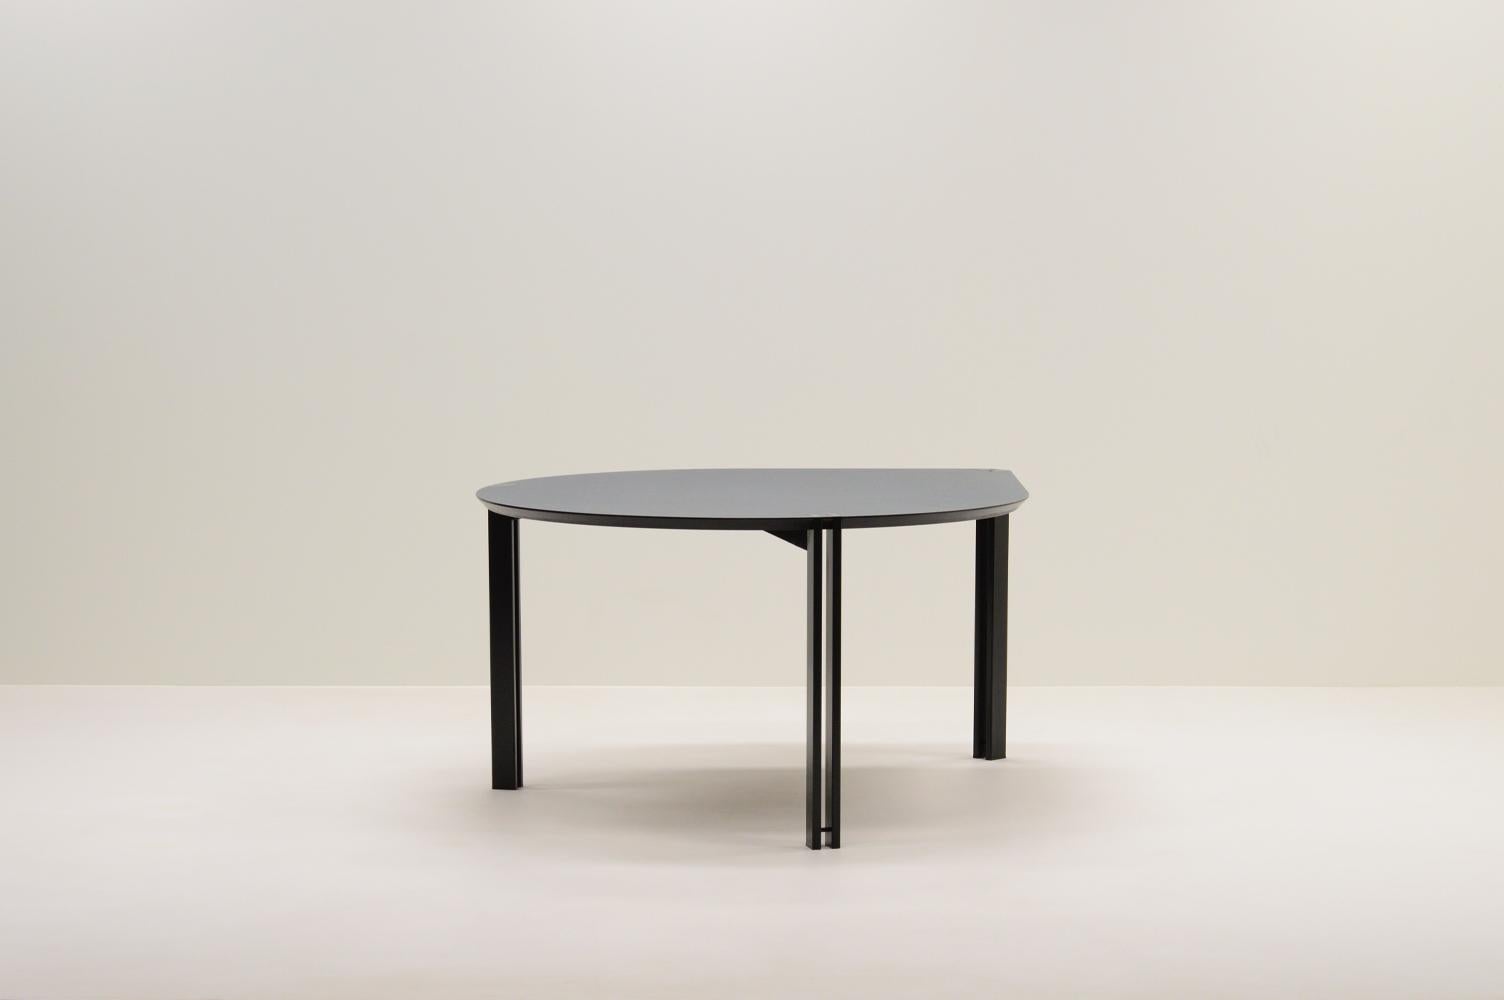 Drop dining table by Harvink, 1980s The Netherlands. Postmodern design table in the shape of a drop. Black laquered metal legs and a Formica veneer multiplex top with a beveled edge. The tip of the top is a 90 degree angle that fits perfect in a